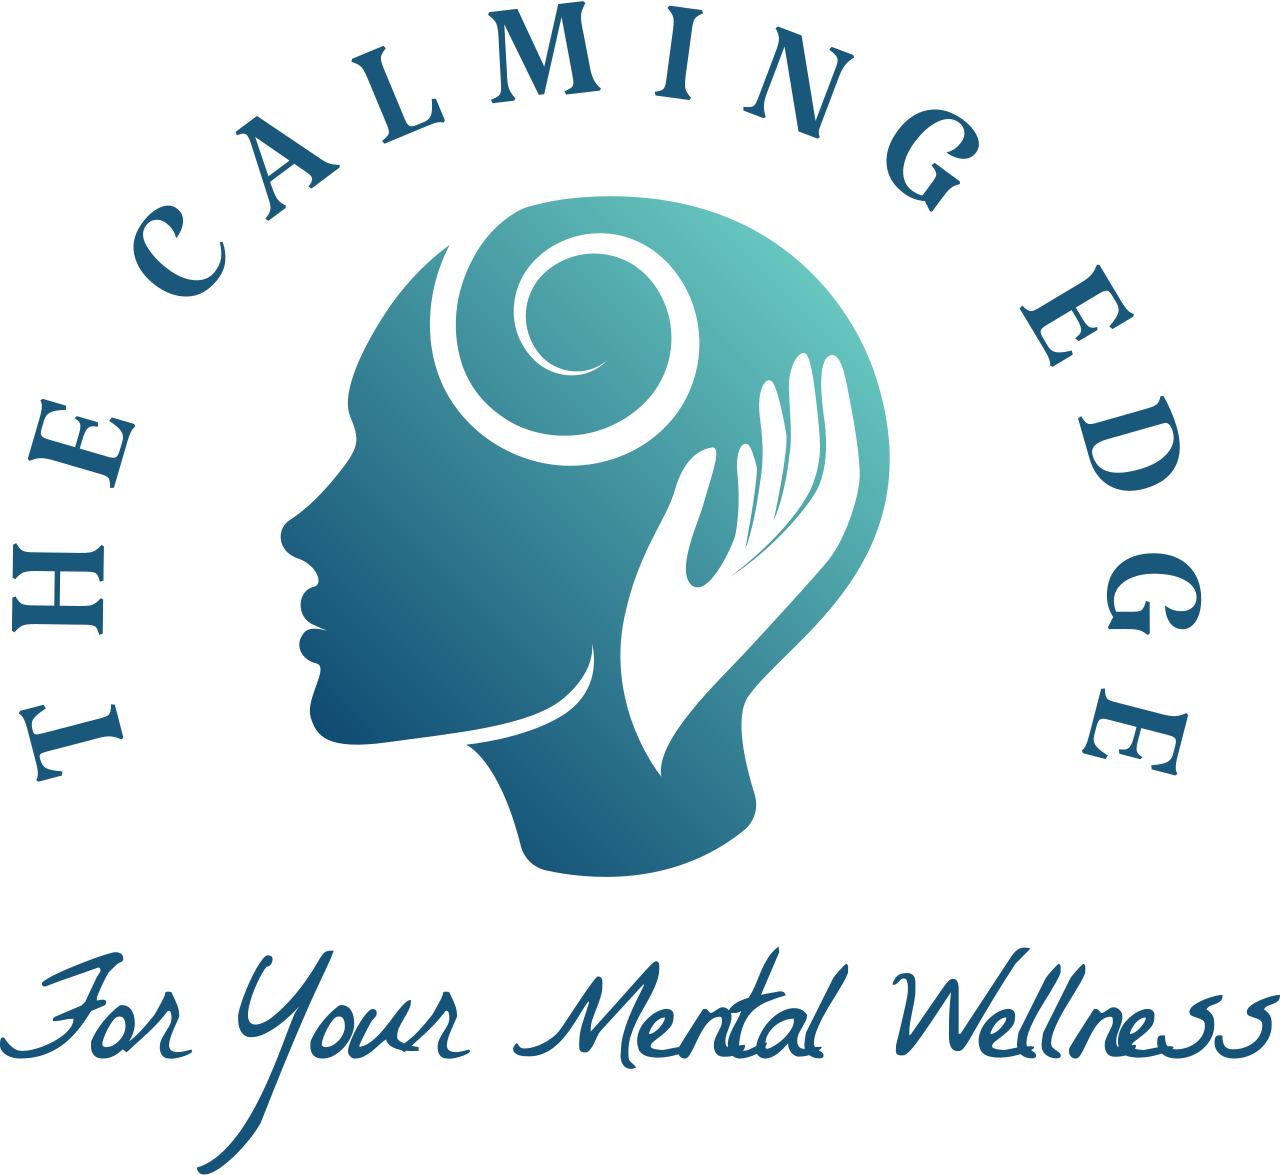 THE CALMING EDGE's web page